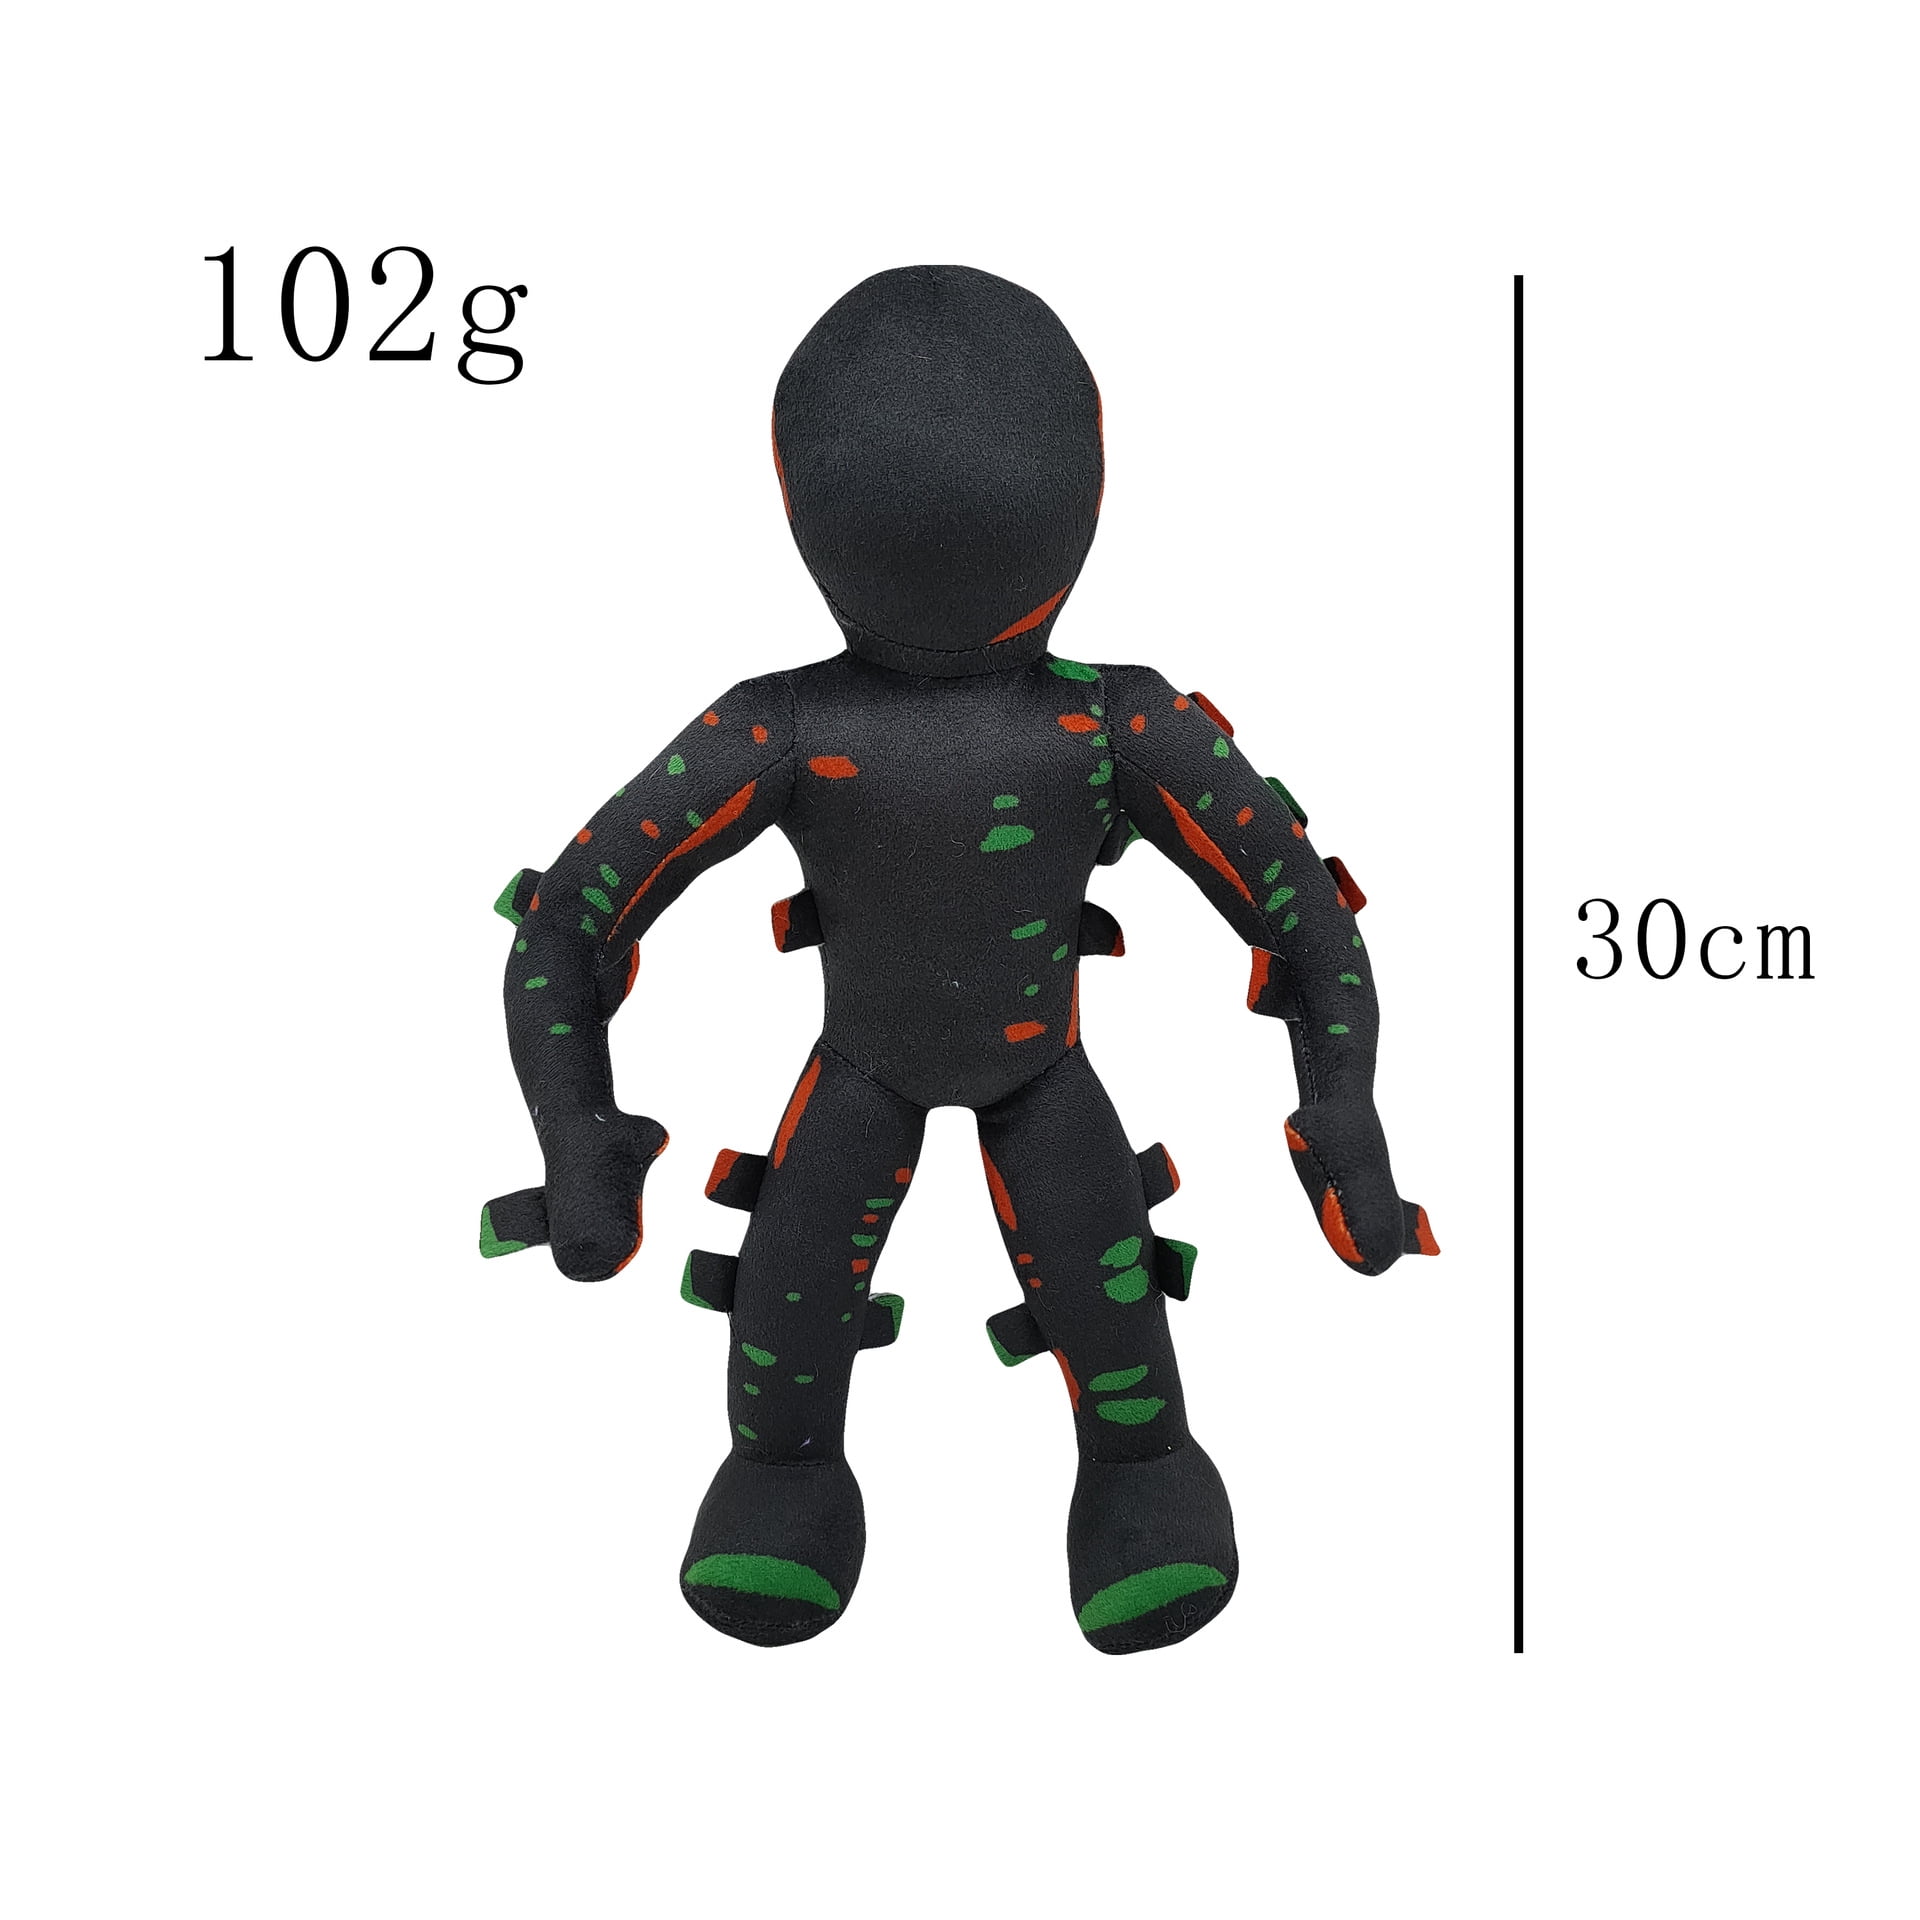  Doors Plush - 9 Jack Plushies Toy for Fans Gift, 2022 New  Monster Horror Game Stuffed Figure Doll for Kids and Adults, Halloween  Christmas Birthday Choice for Boys Girls : Toys